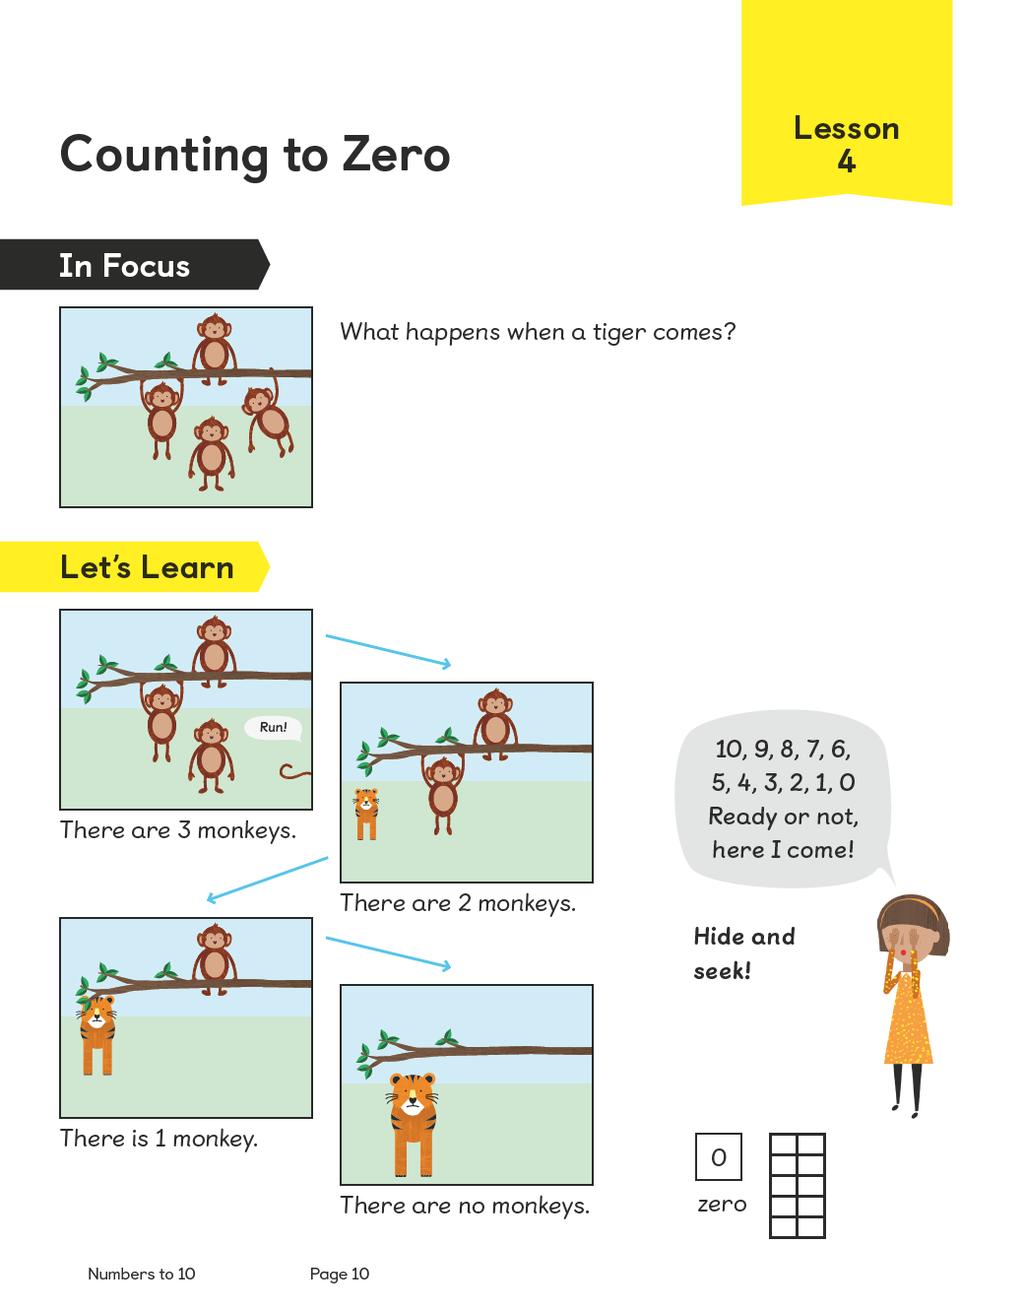 Numbers to 10 1 Each lesson leads onto a new level of understanding of a concept.